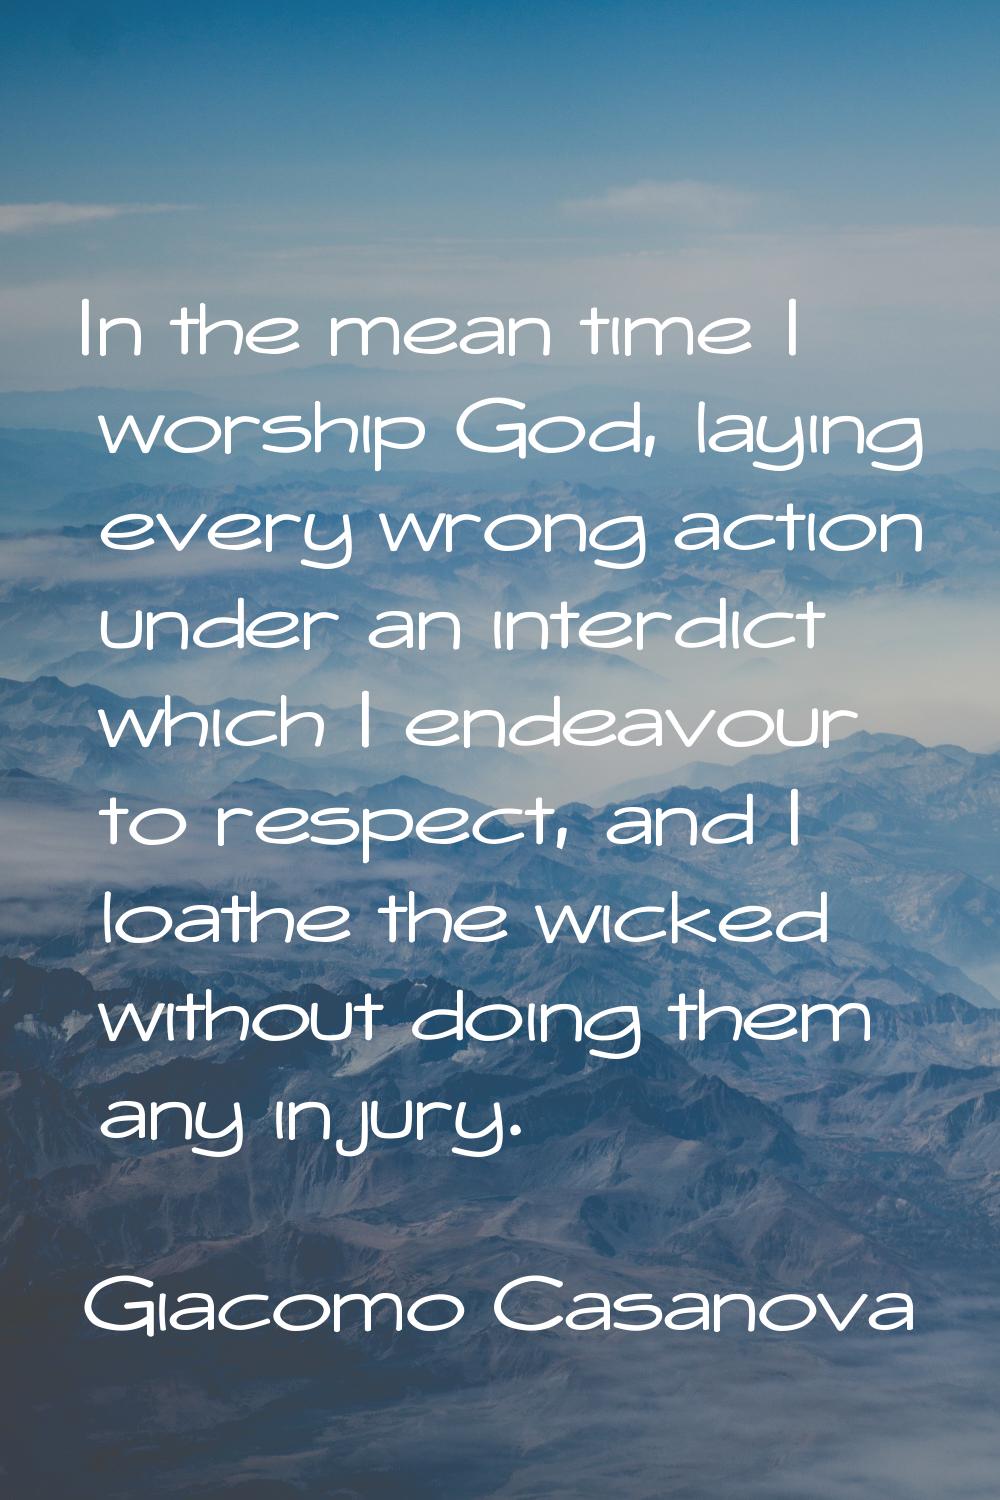 In the mean time I worship God, laying every wrong action under an interdict which I endeavour to r